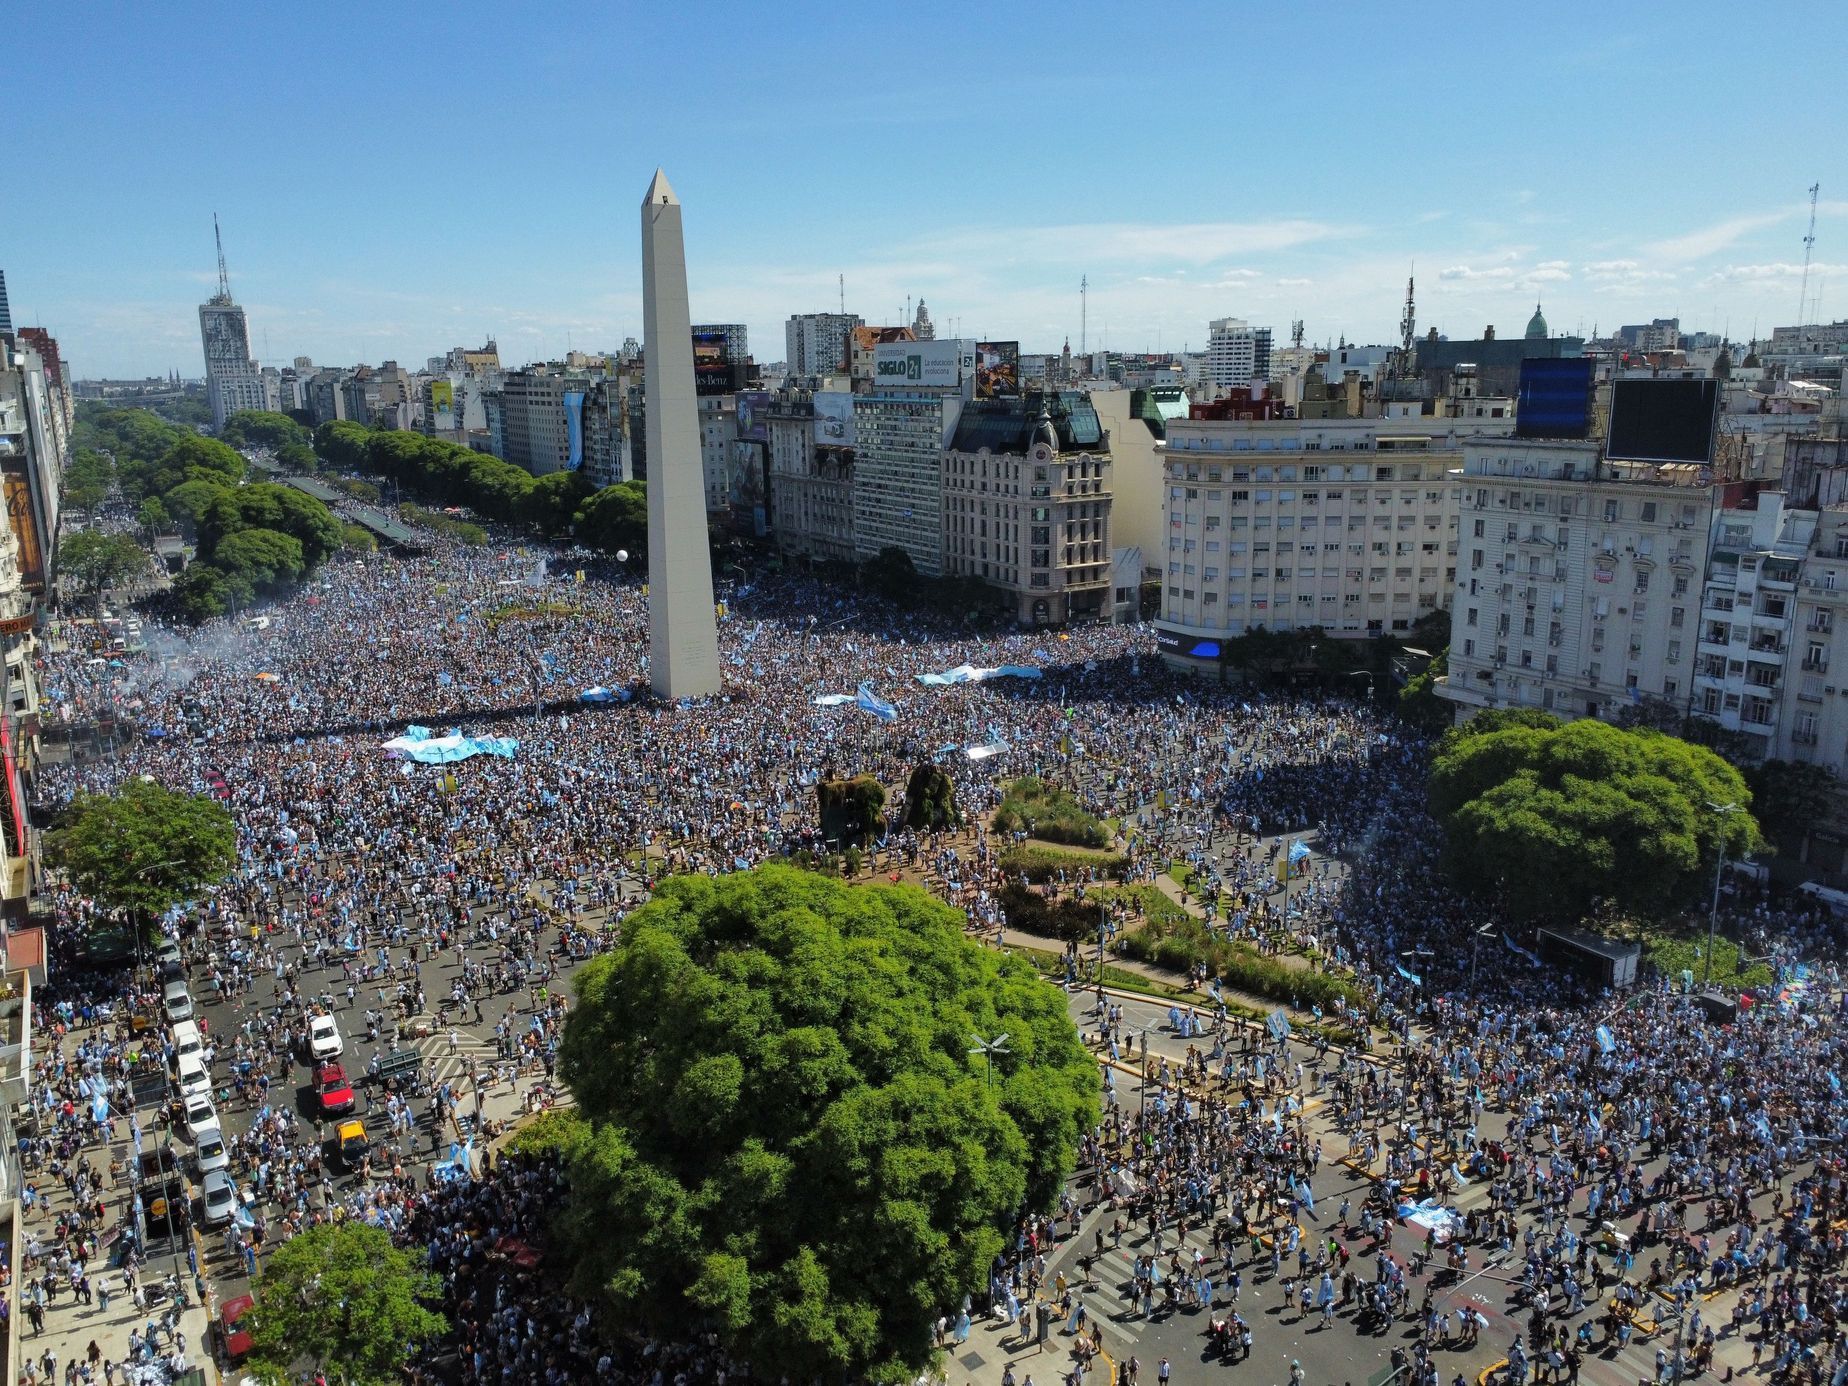 FIFA World Cup Final Qatar 2022 - Fans in Buenos Aires